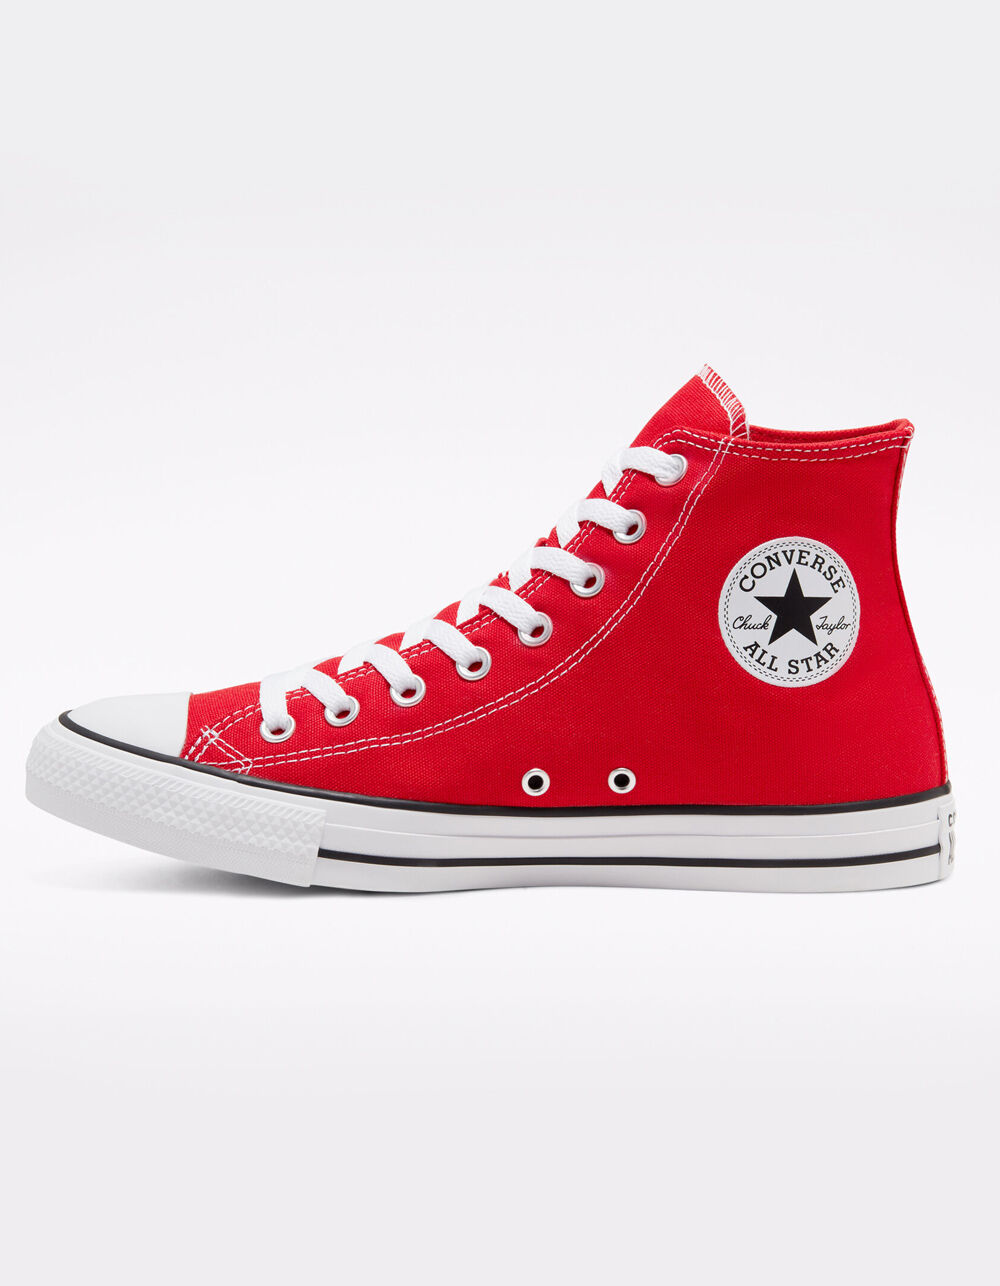 CONVERSE Cheerful Chuck Taylor All Star Red High Top Shoes - RED | Tillys